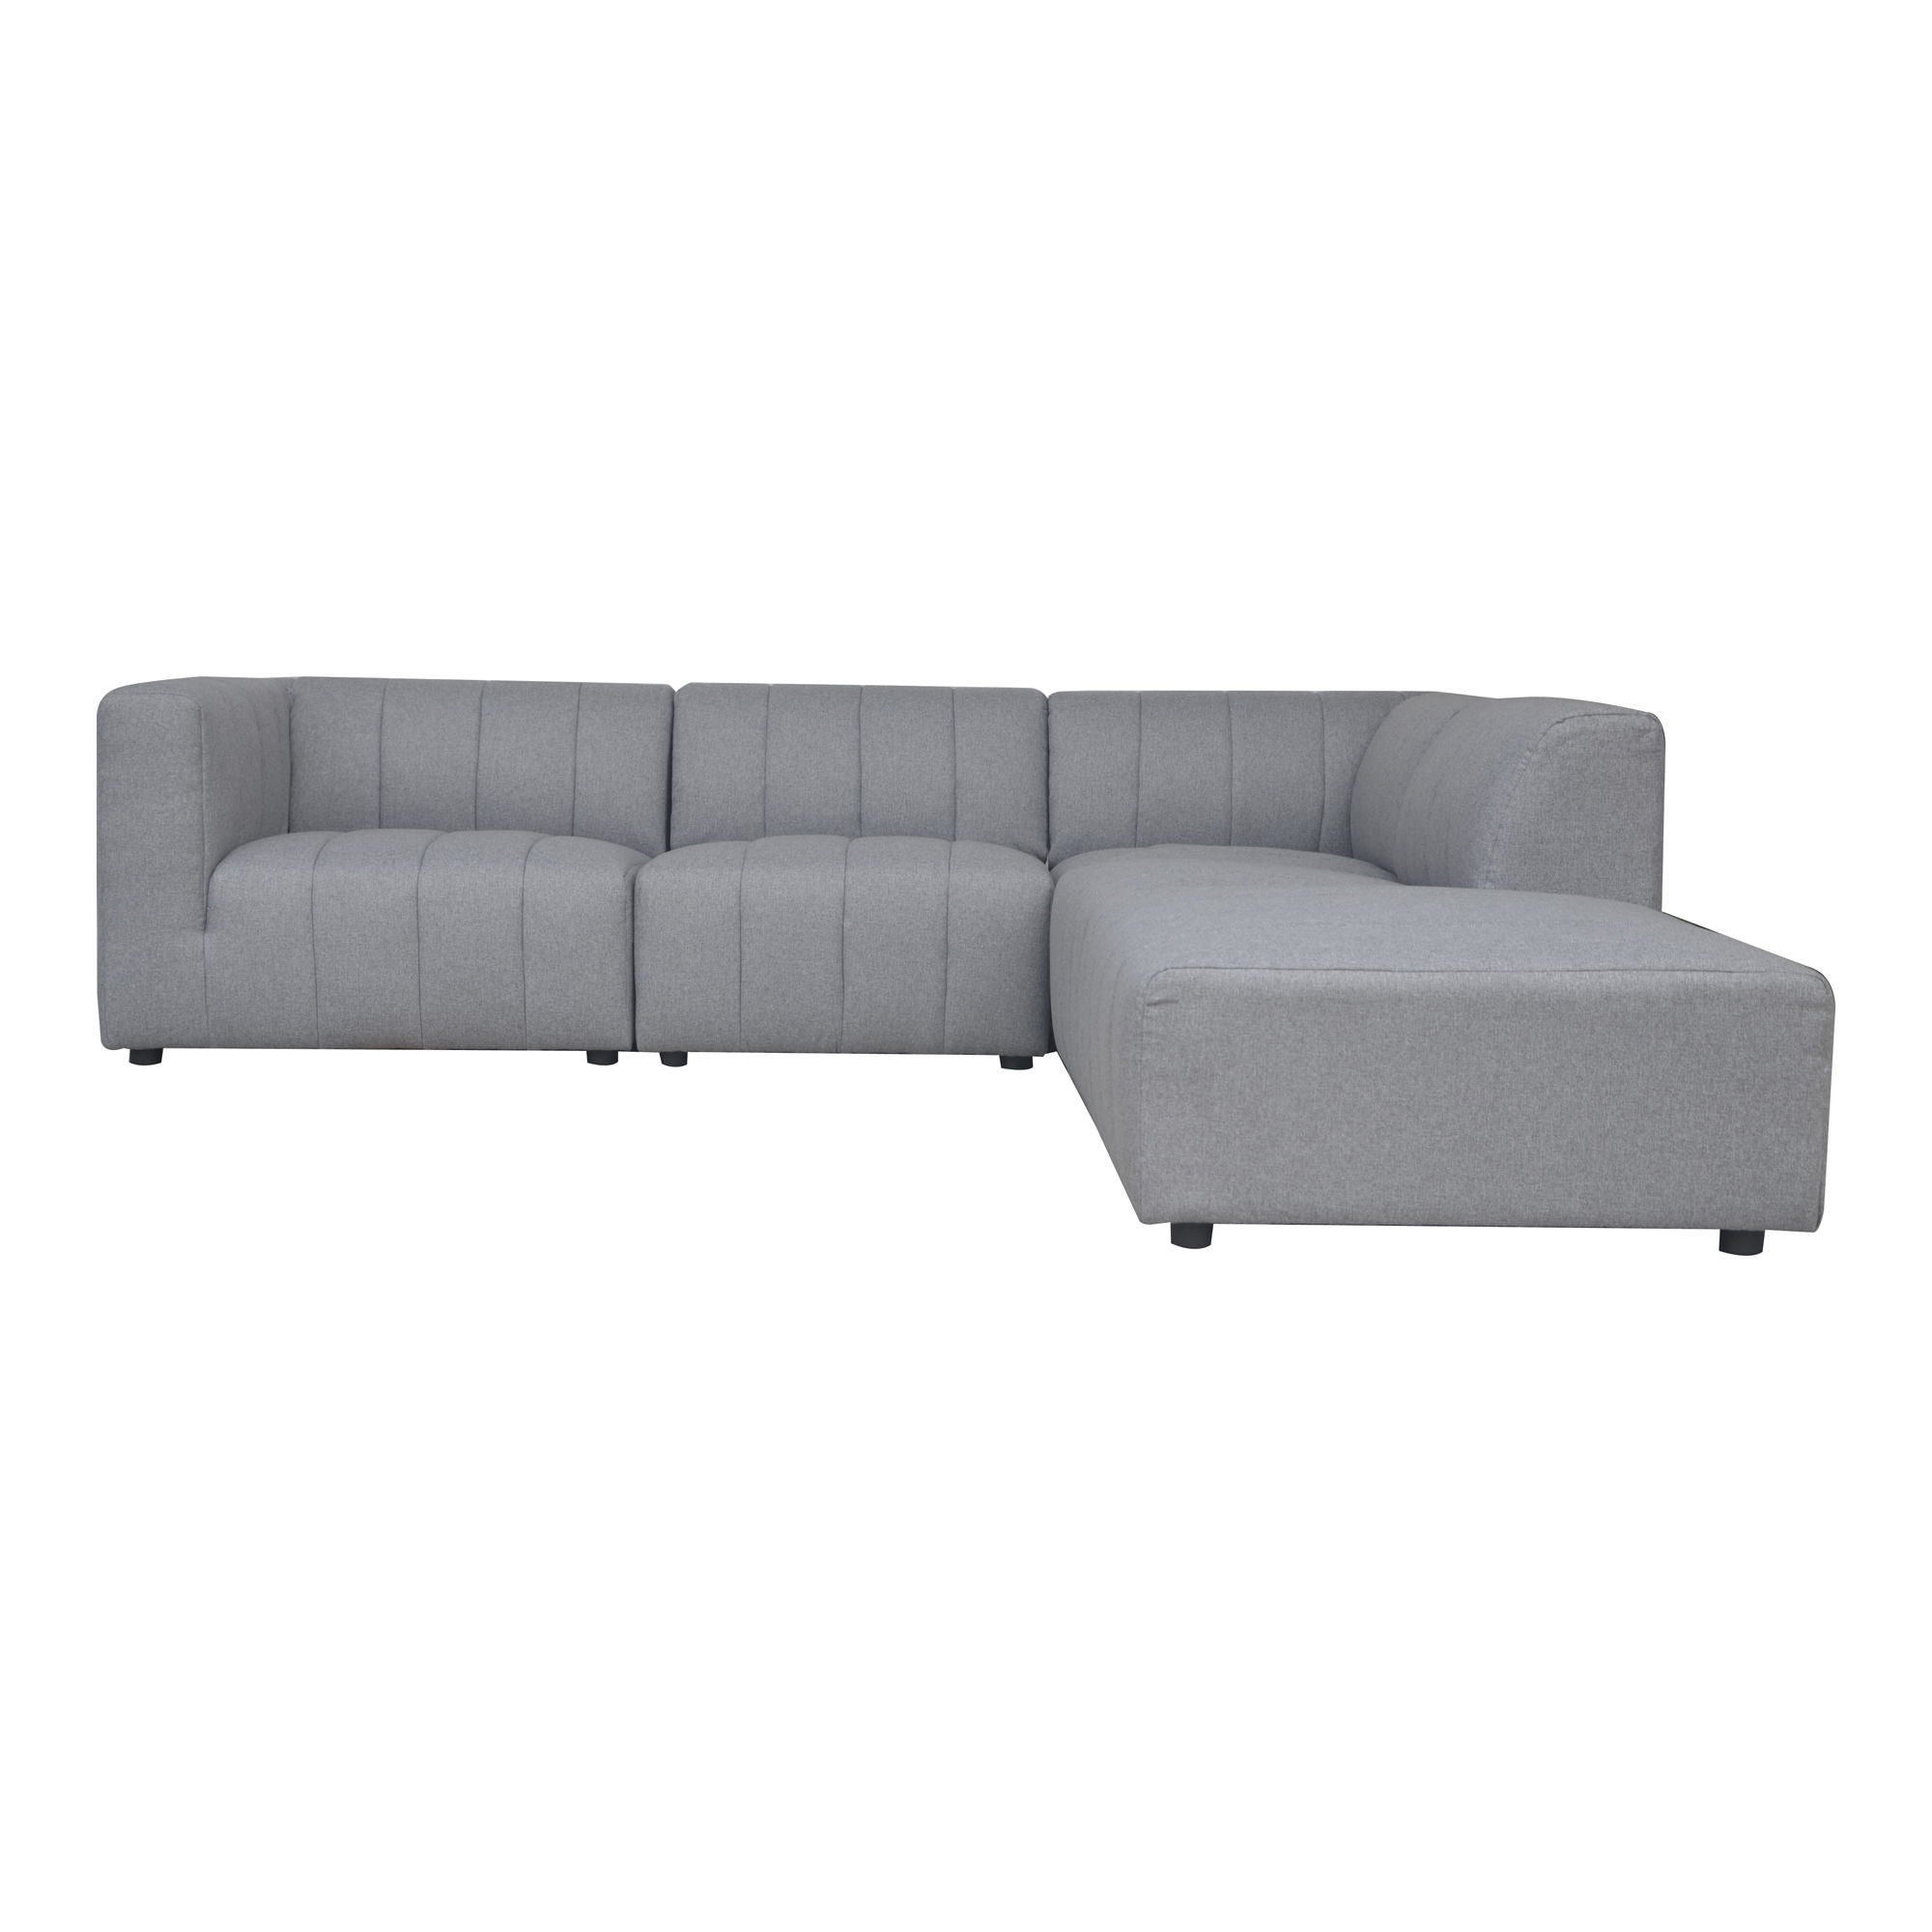 Lyric - Dream Modular Sectional Right Grey - Dark Gray-Stationary Sectionals-American Furniture Outlet